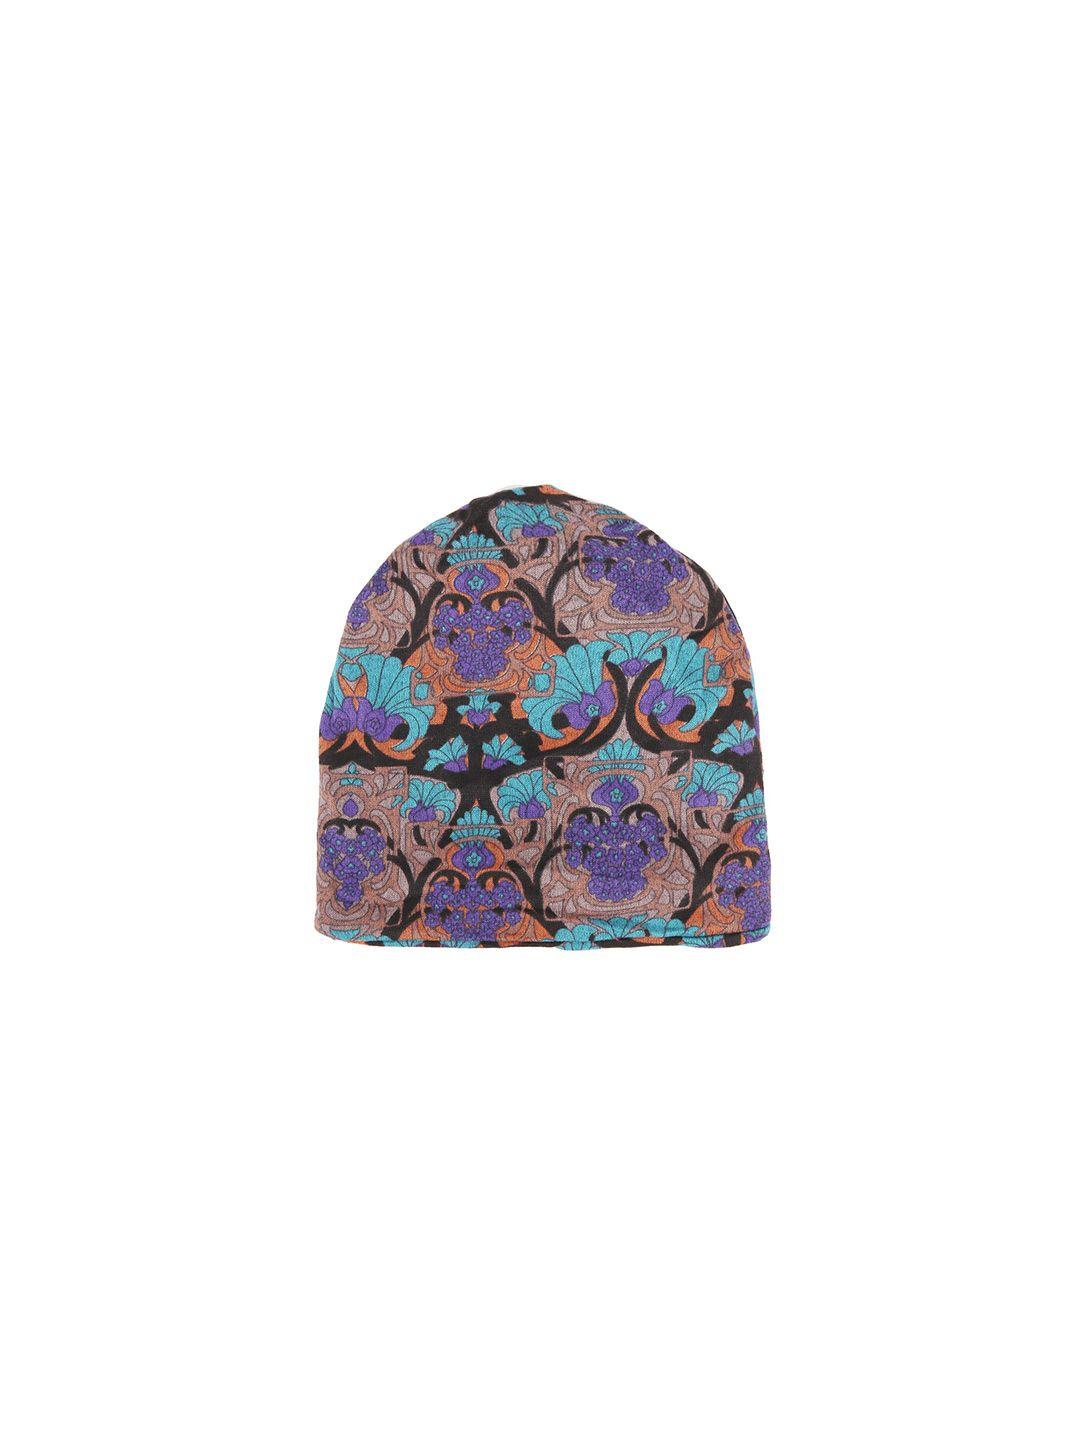 isweven multicoloured printed cotton beanie cap